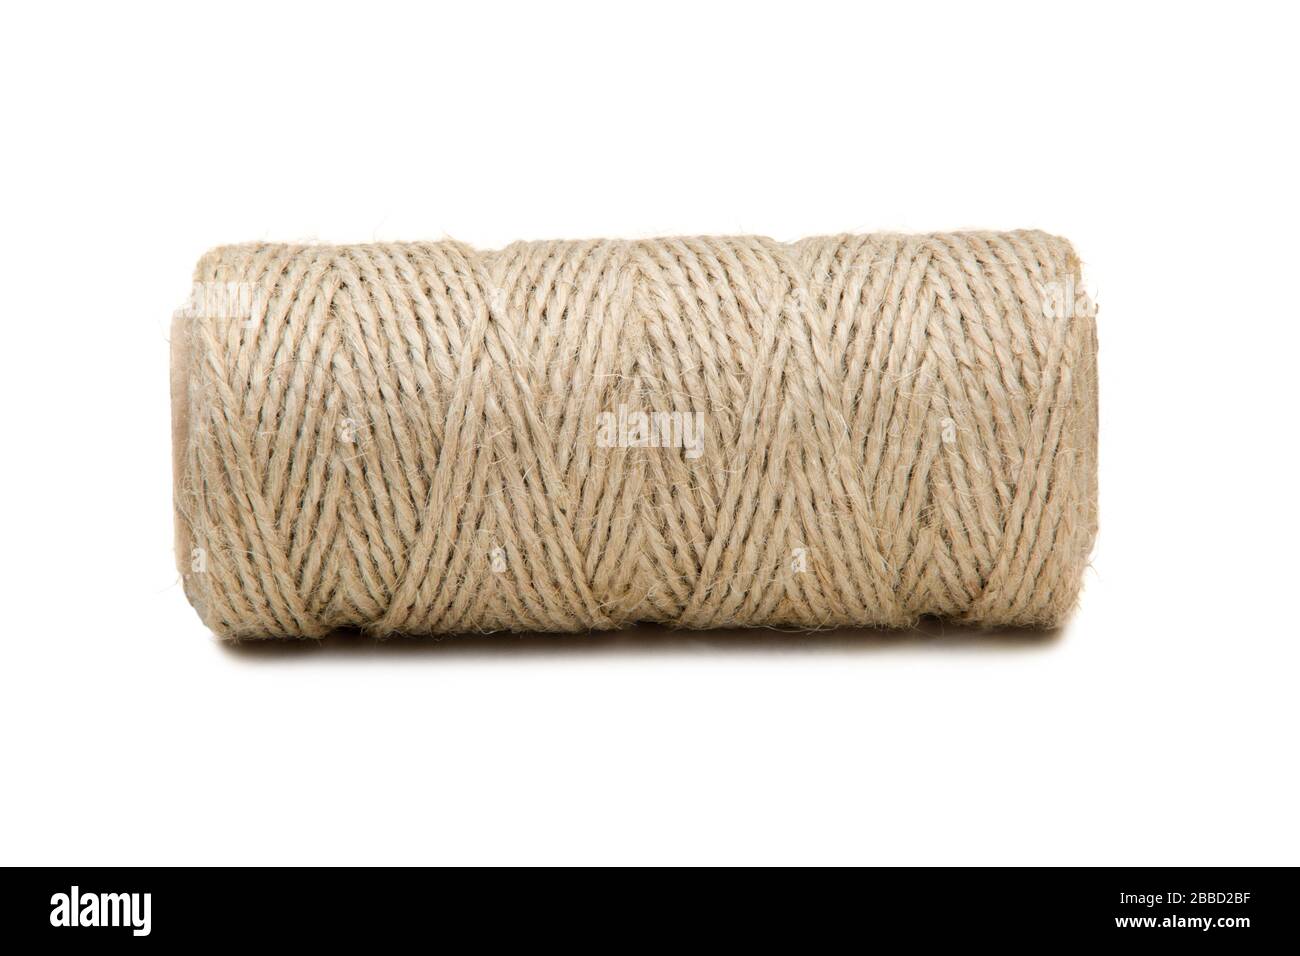 image of a thick thread wound into a spool on a white background Stock  Photo - Alamy